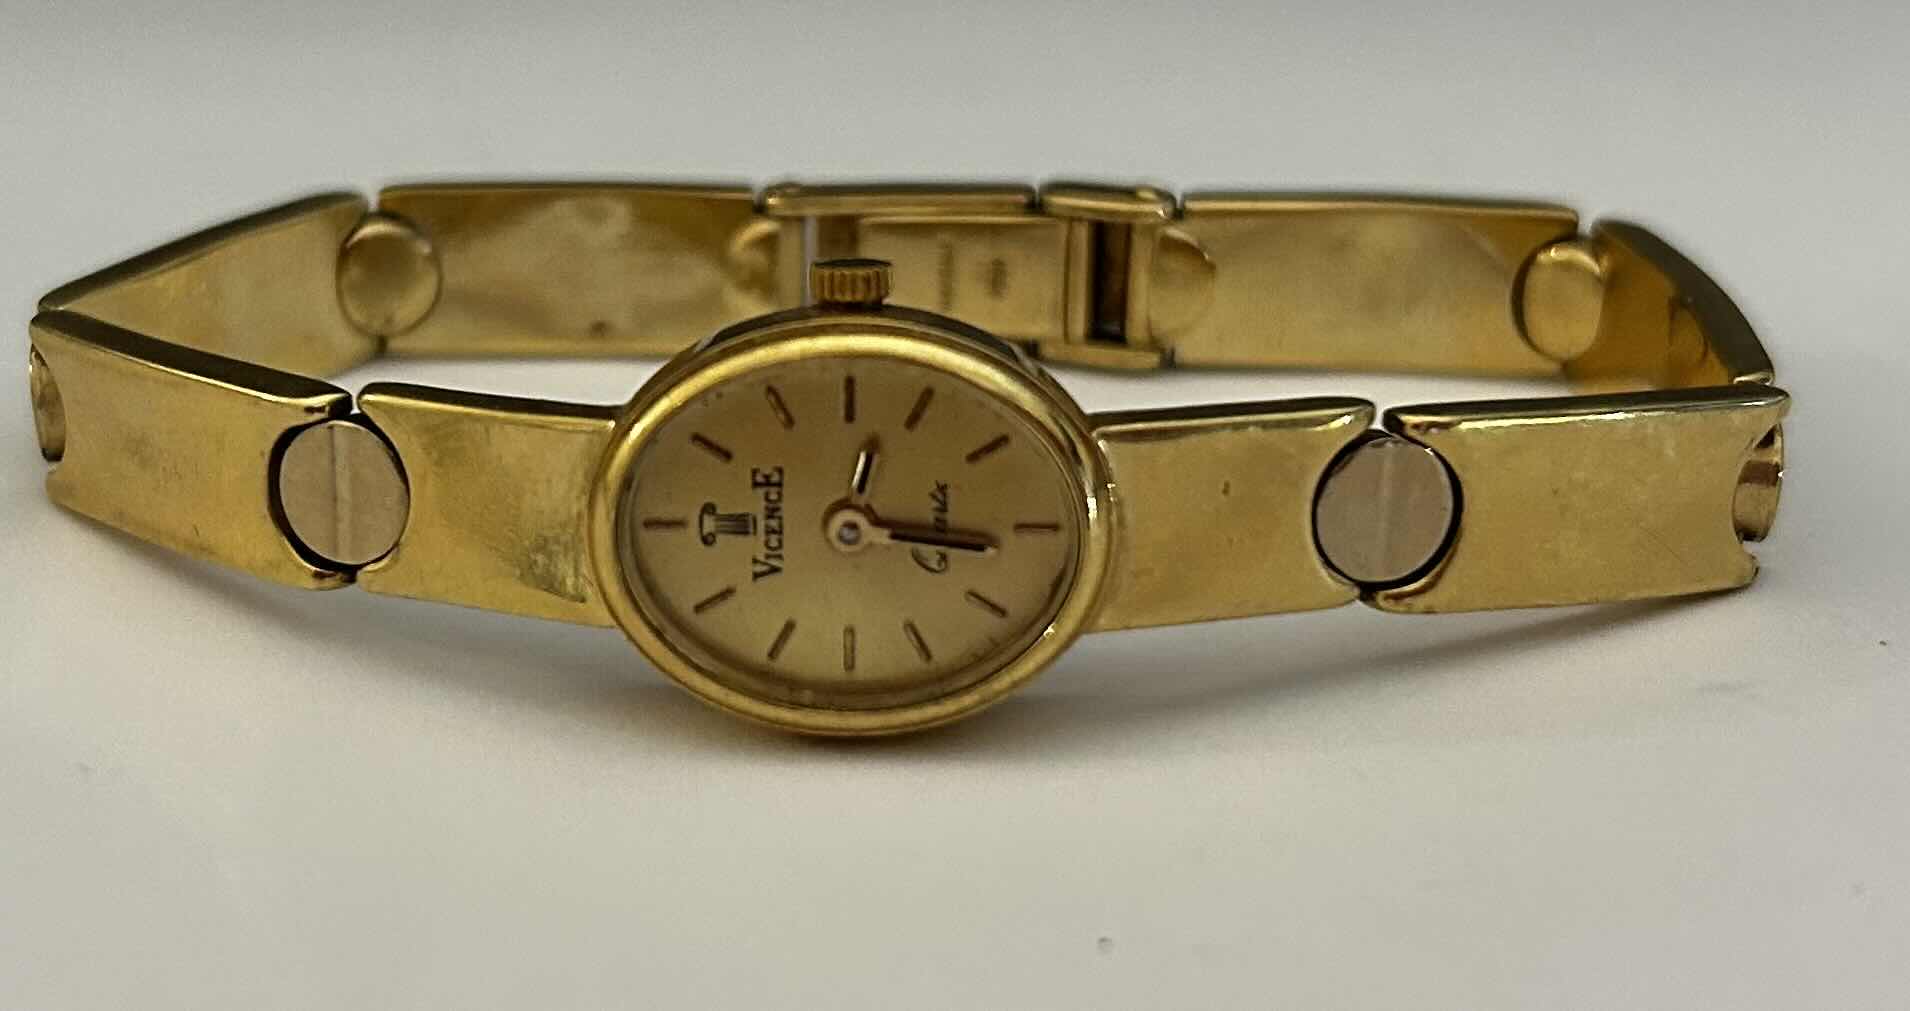 Photo 4 of SOLID 14K GOLD MADE IN ITALY QUARTZ WATCH WITH SOLID 14K BRACELET WATCH BAND